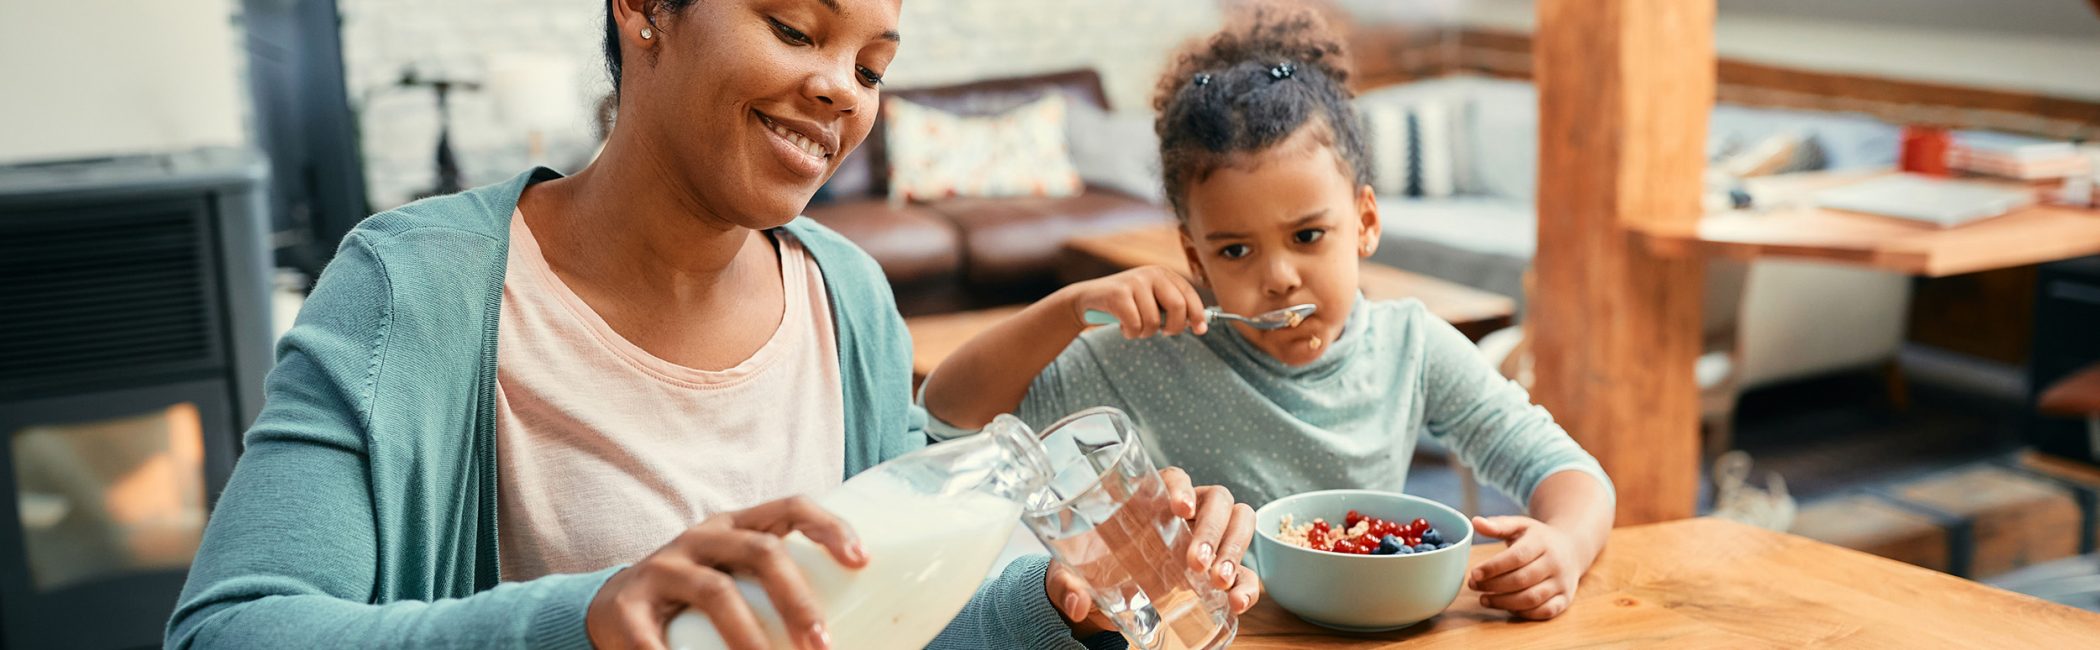 Happy African American mother pouring milk into a glass while eating breakfast with her daughter at dining table.